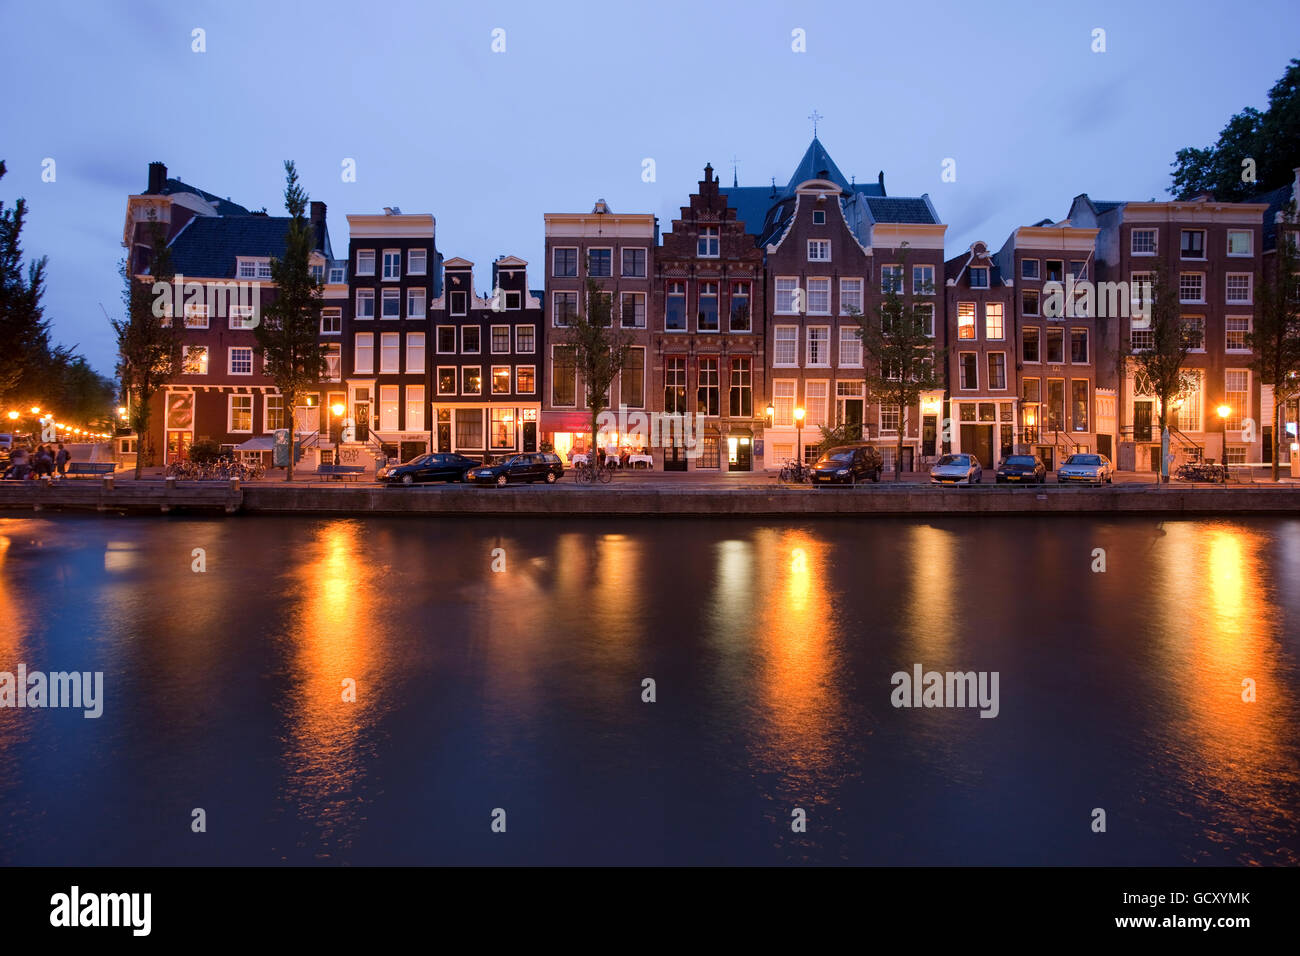 Canal houses in the evening on the Herengracht canal, Amsterdam, Holland, Netherlands, Europe Stock Photo